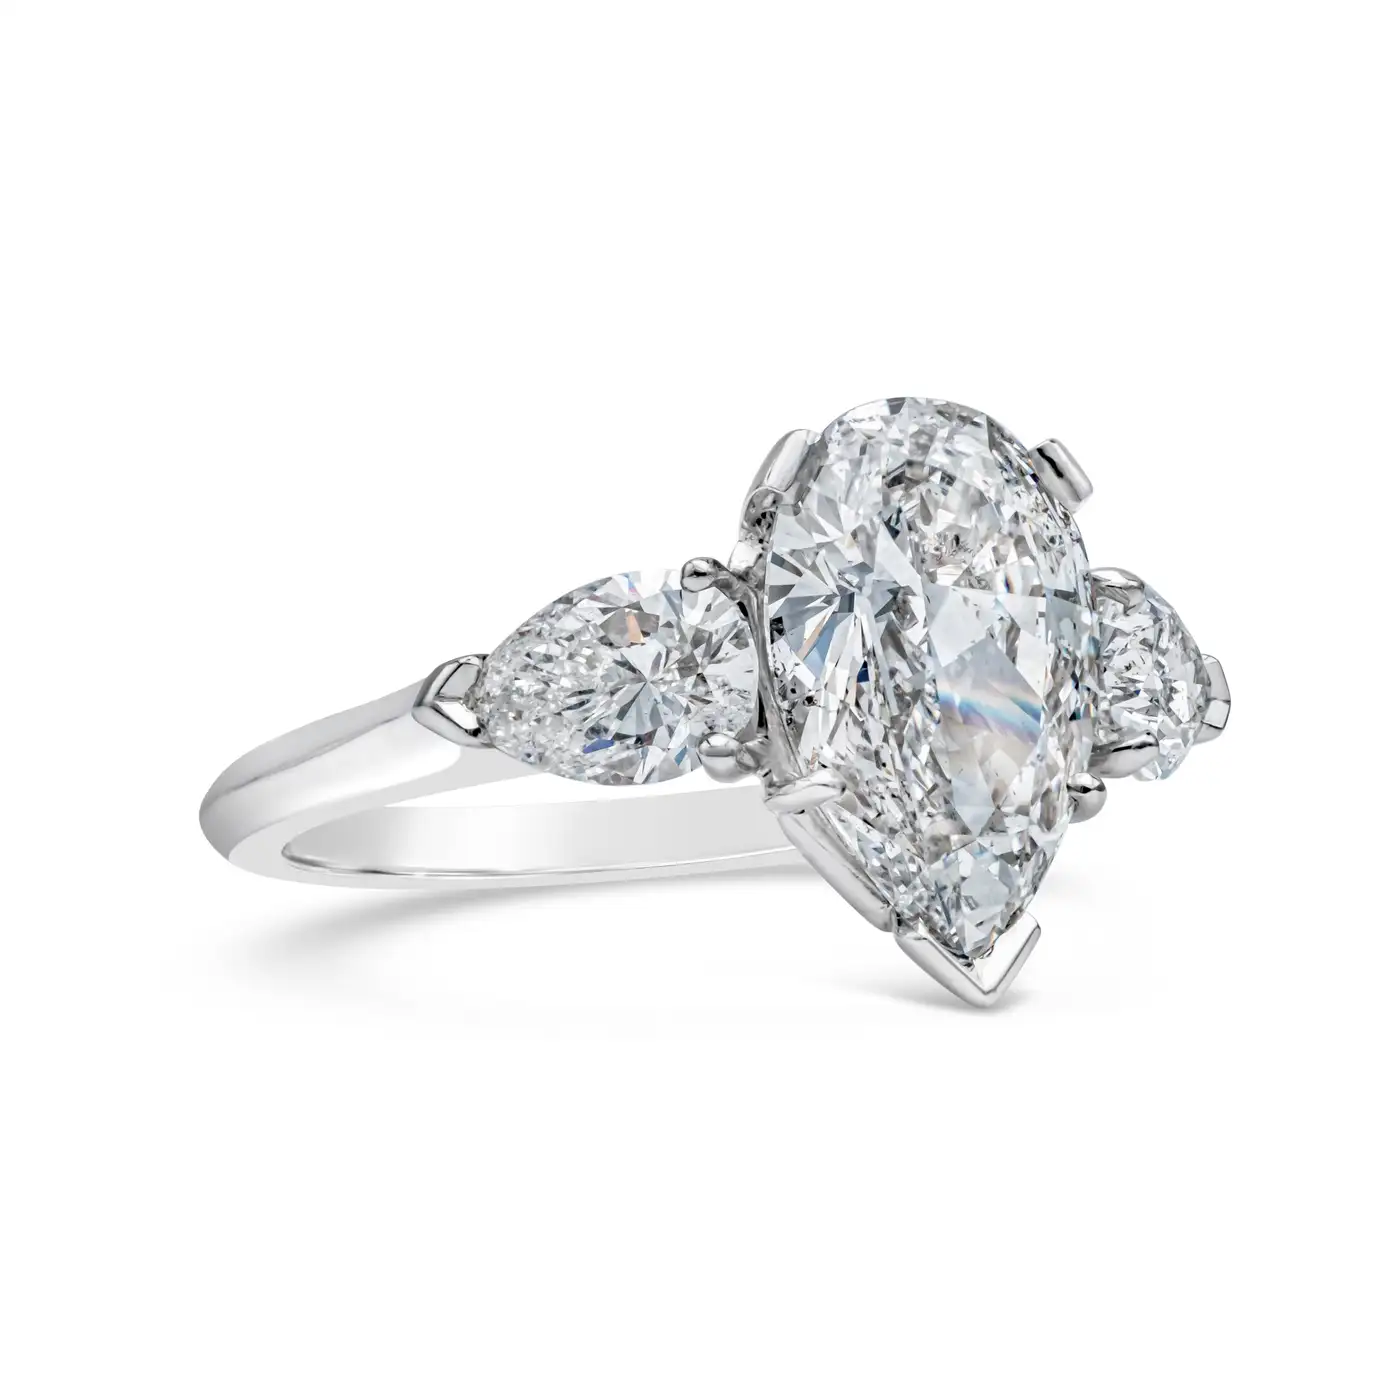 1.88-Carats-Pear-Shape-Diamond-Three-Stone-Engagement-Ring-GIA-Certified-5.webp